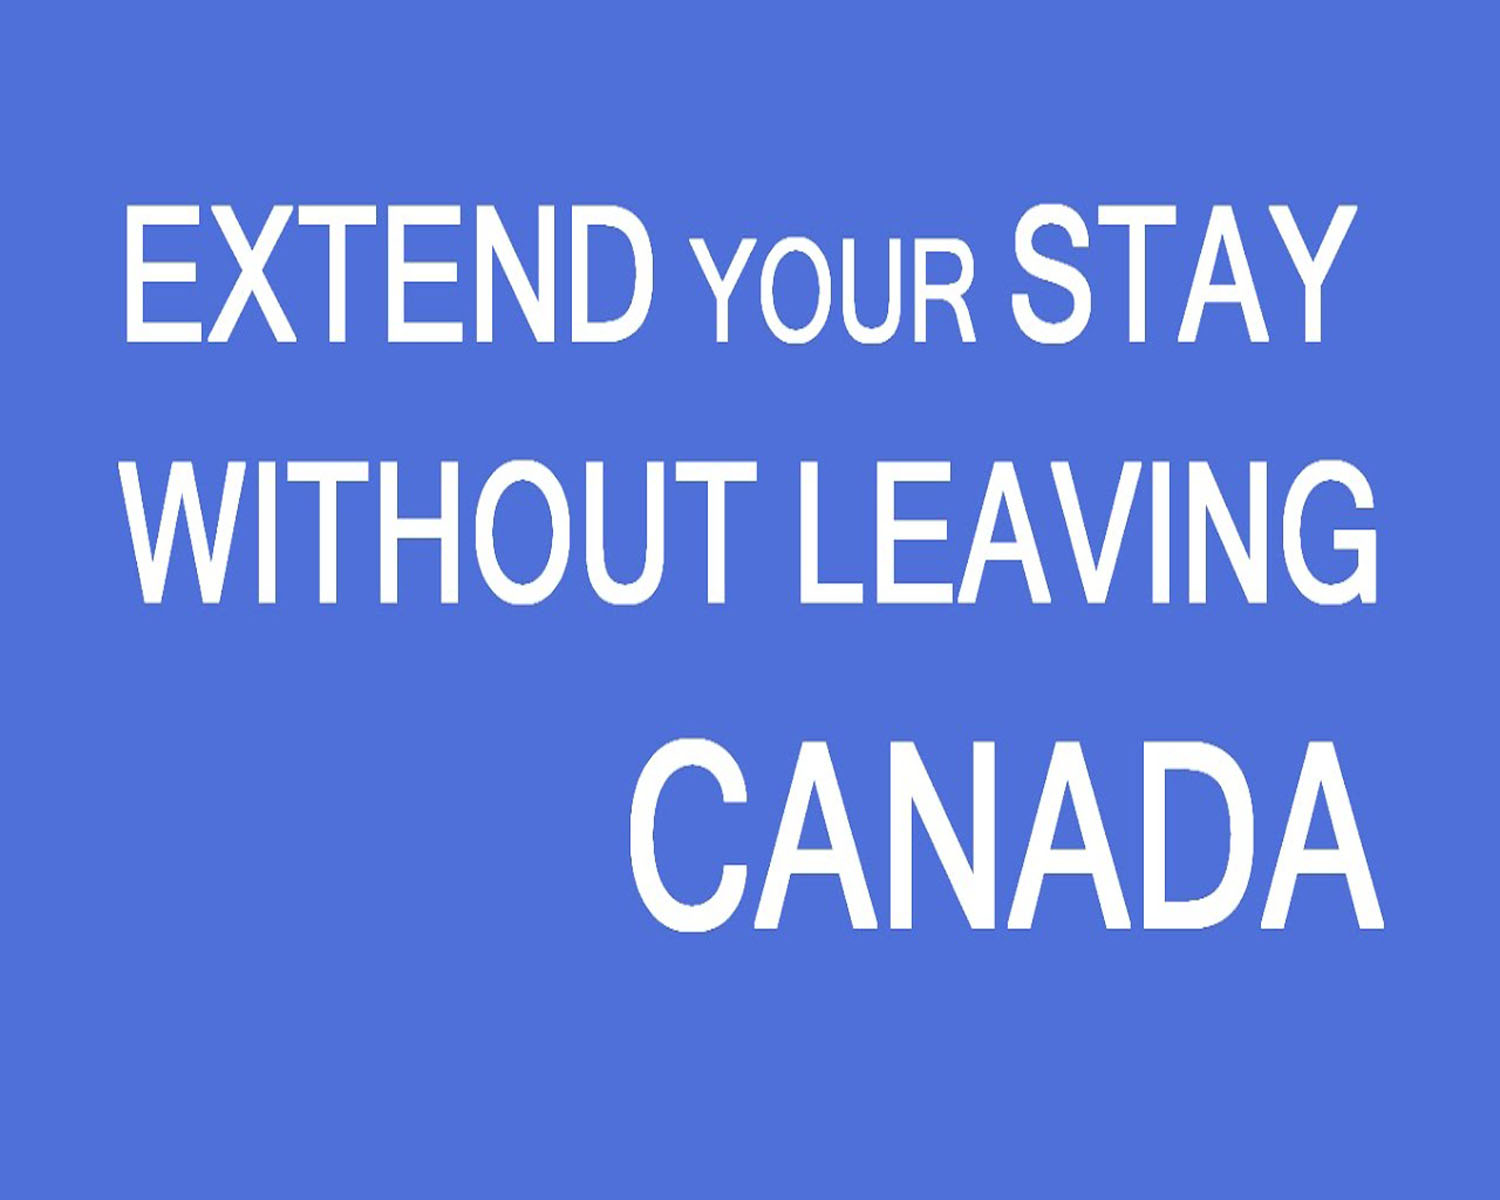  Apply for Extending your Stay in Canada